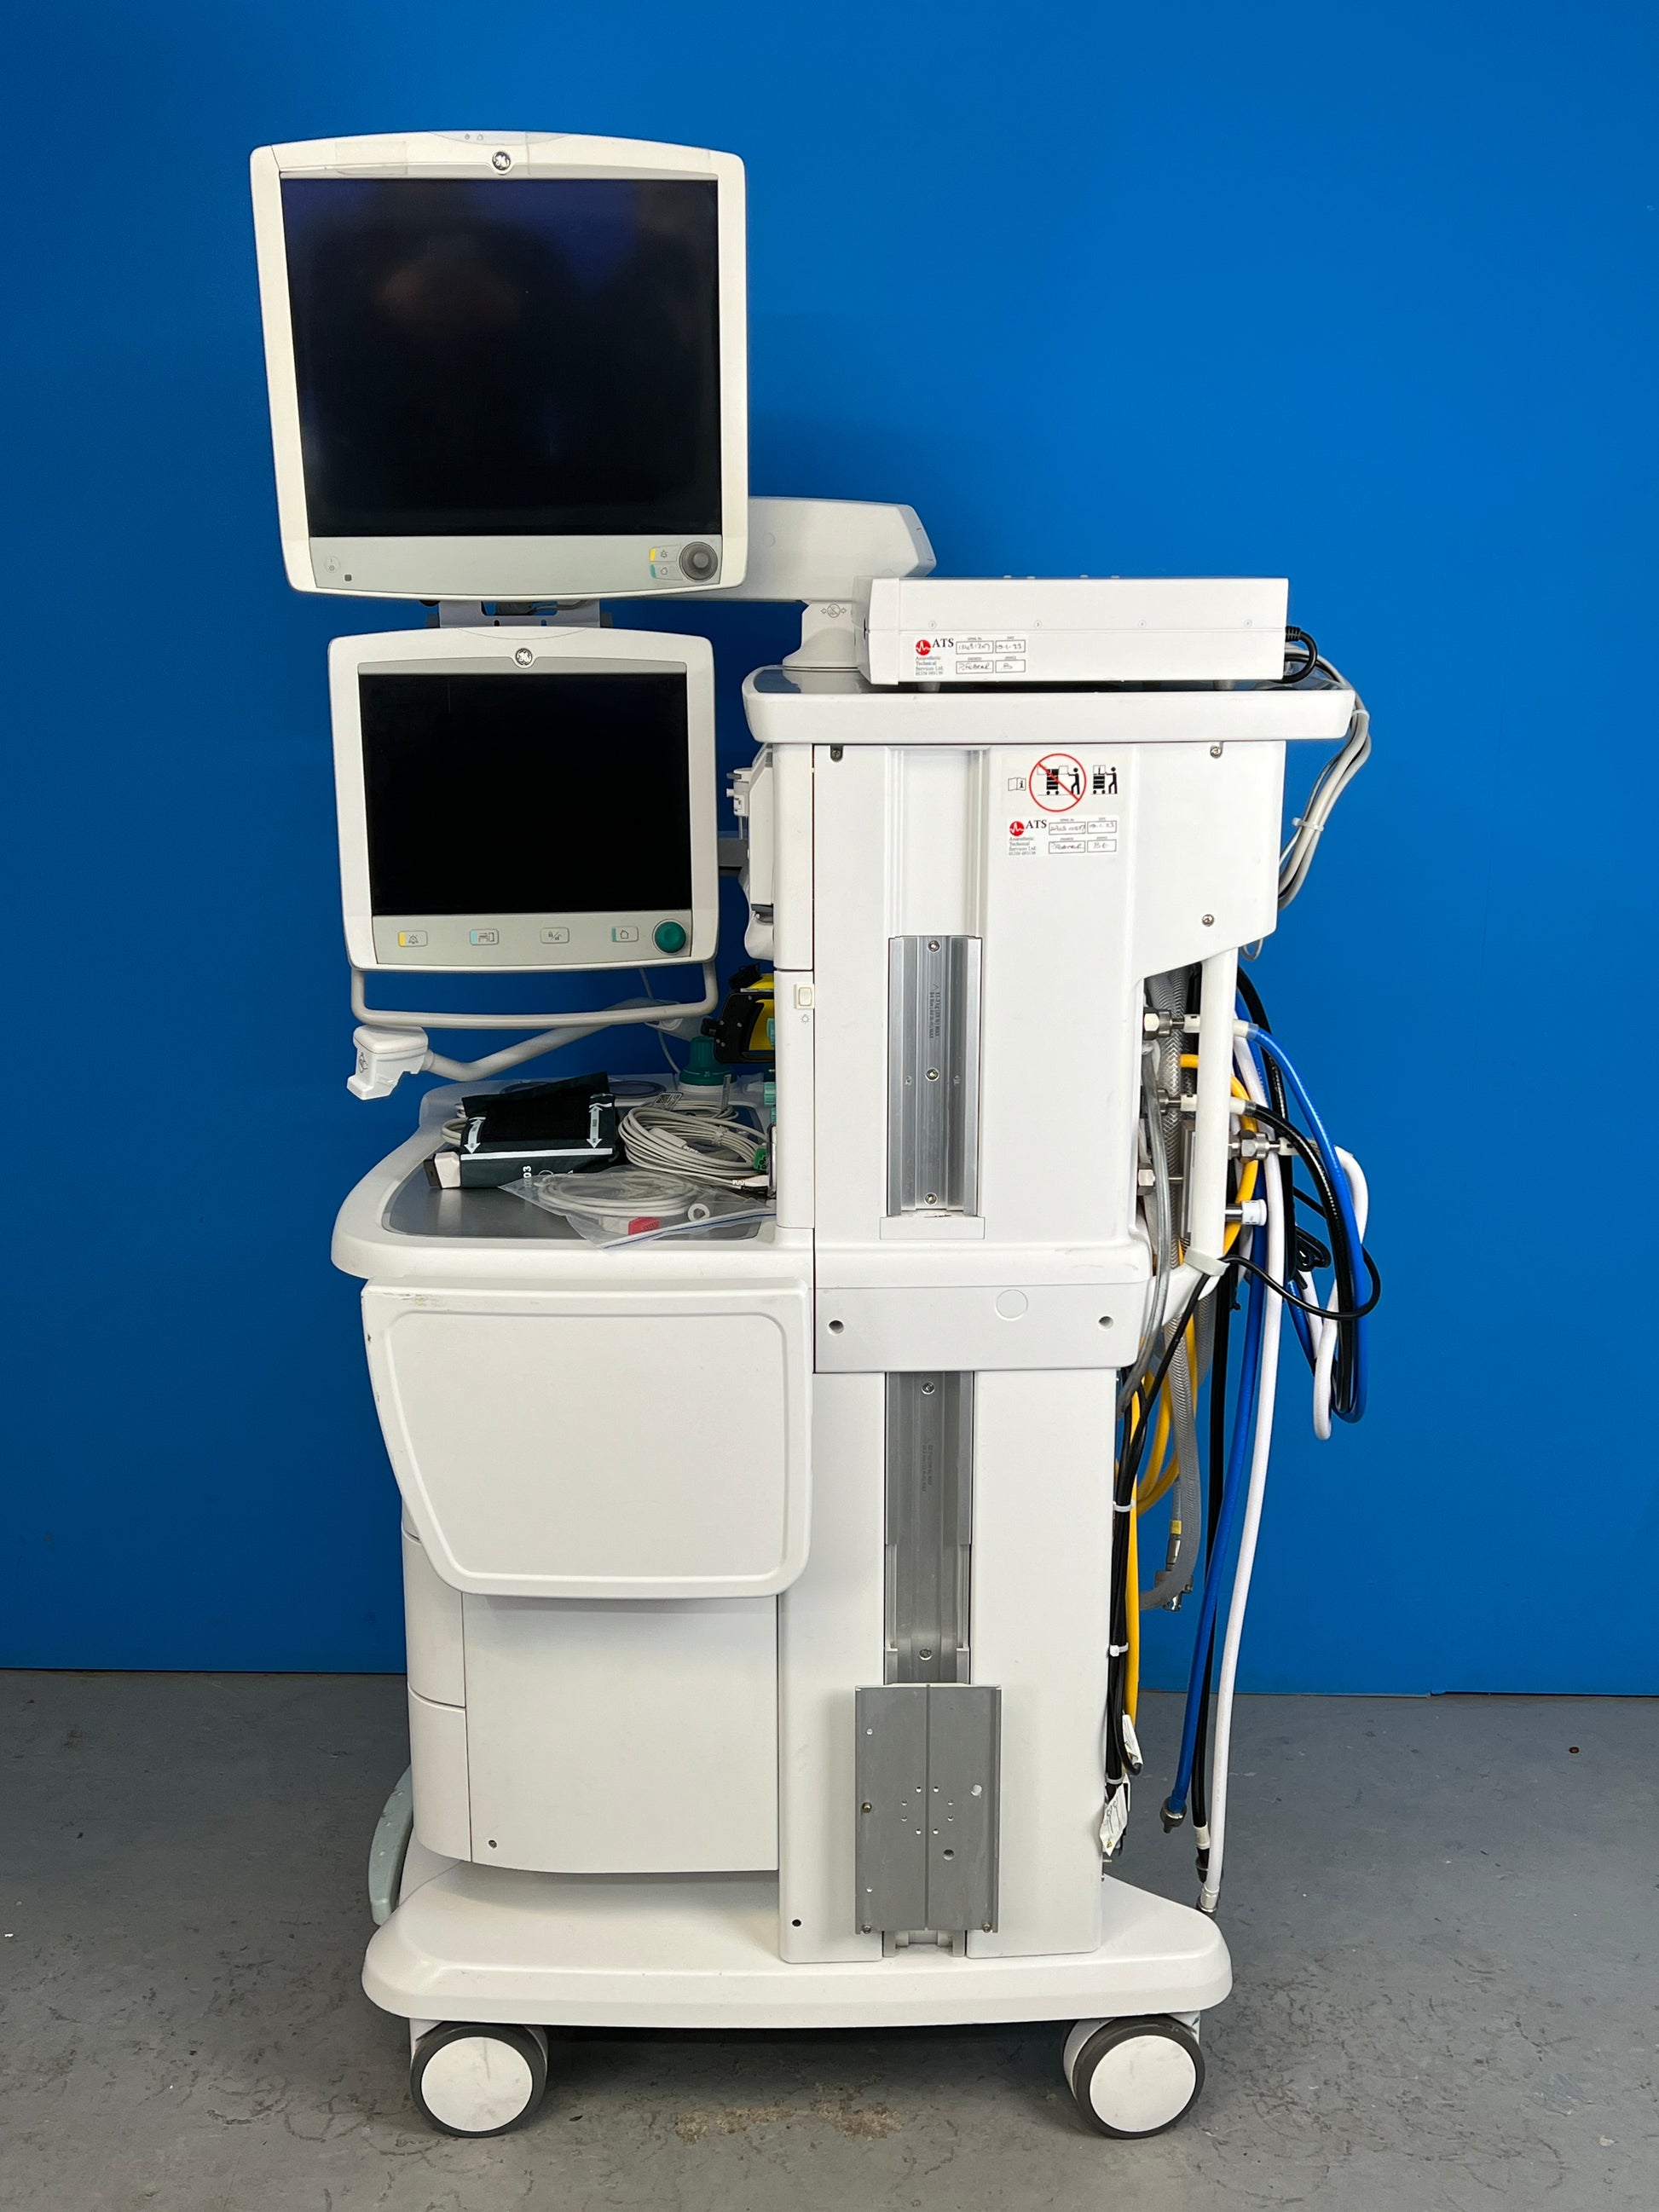 This anesthesia system is designed for mixing and delivering inhalation anesthetics, Air, O2, and N2O.